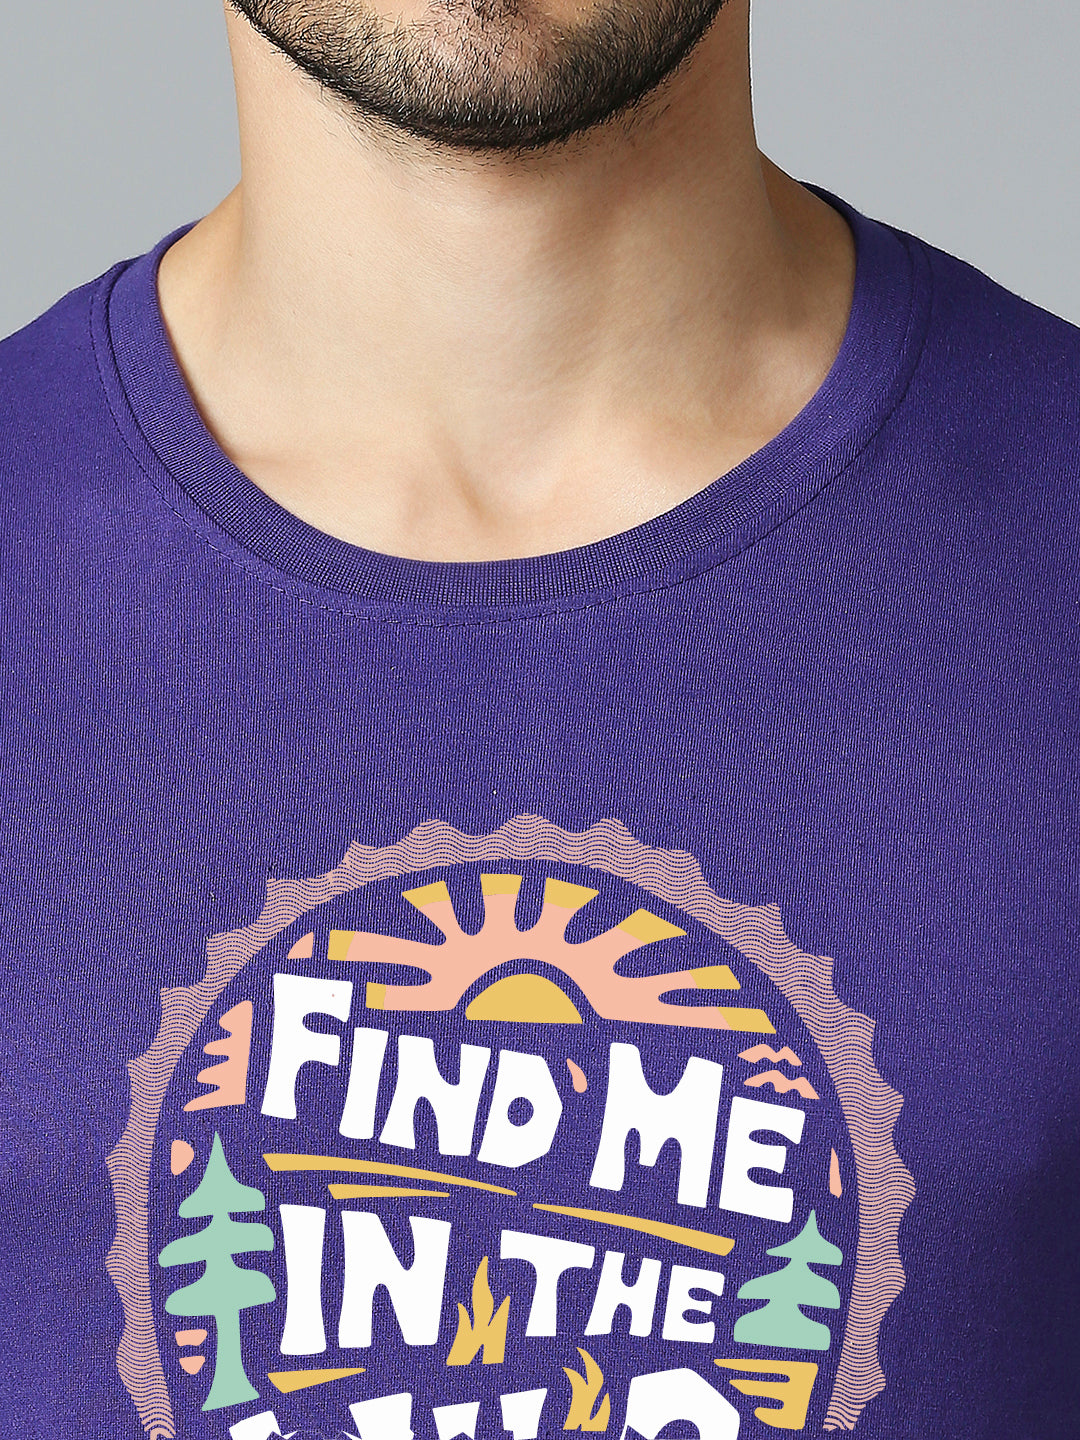 Find Me In The Wild T-Shirt